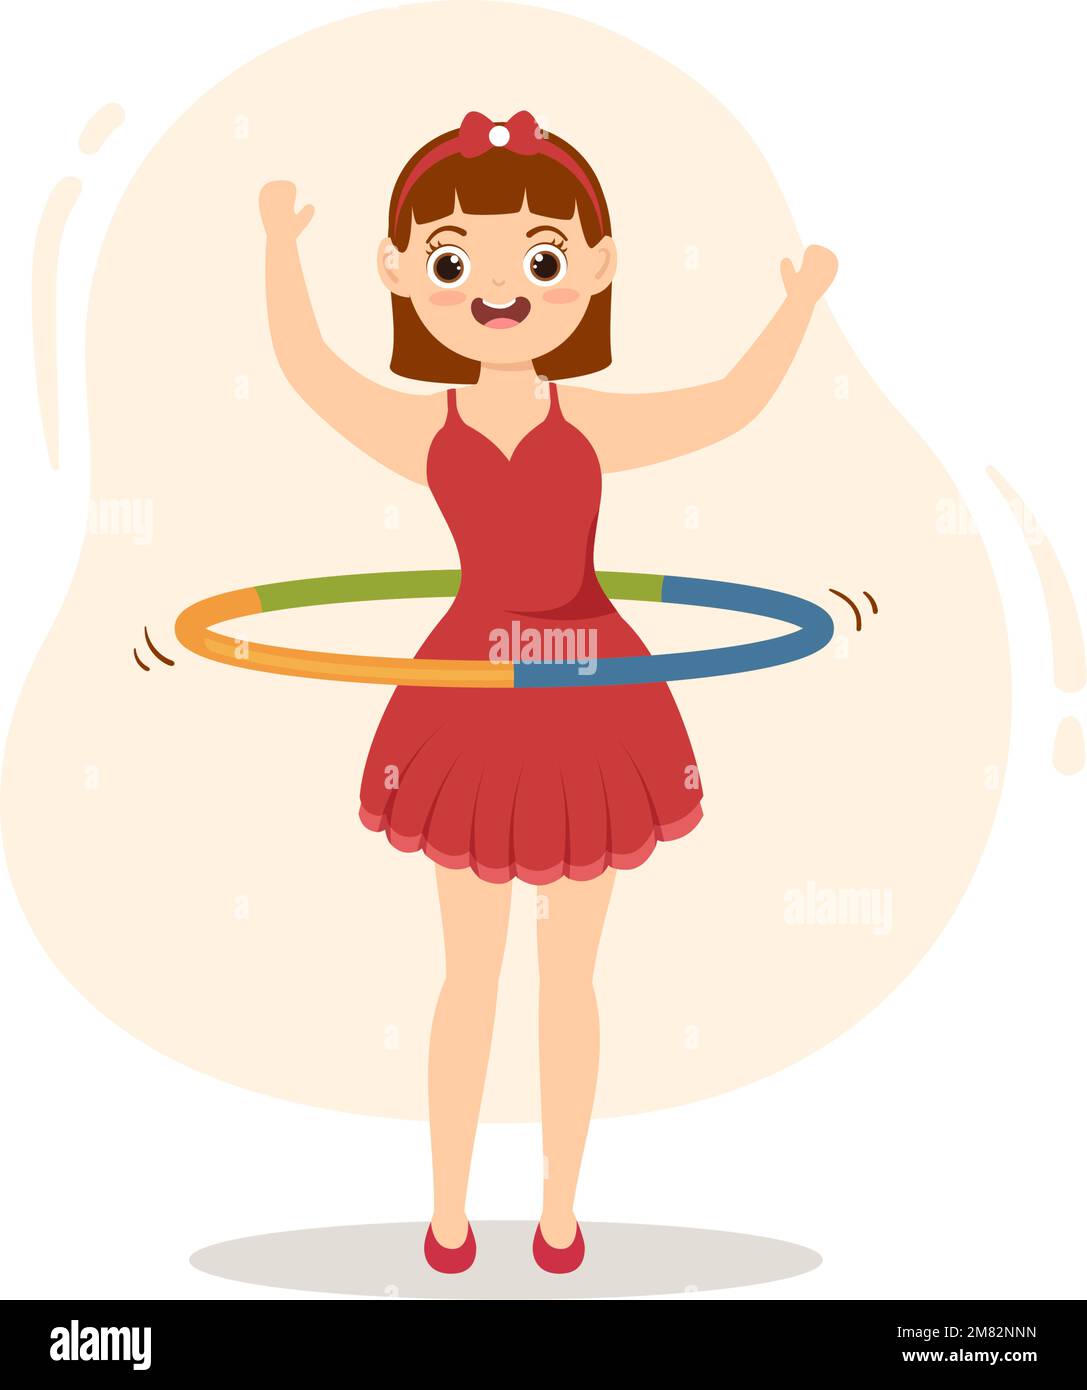 Hula Hoop Illustration with Kids Exercising Playing Hula Hoops and Fitness Training in Sports Activity Flat Cartoon Hand Drawn Templates Stock Vector